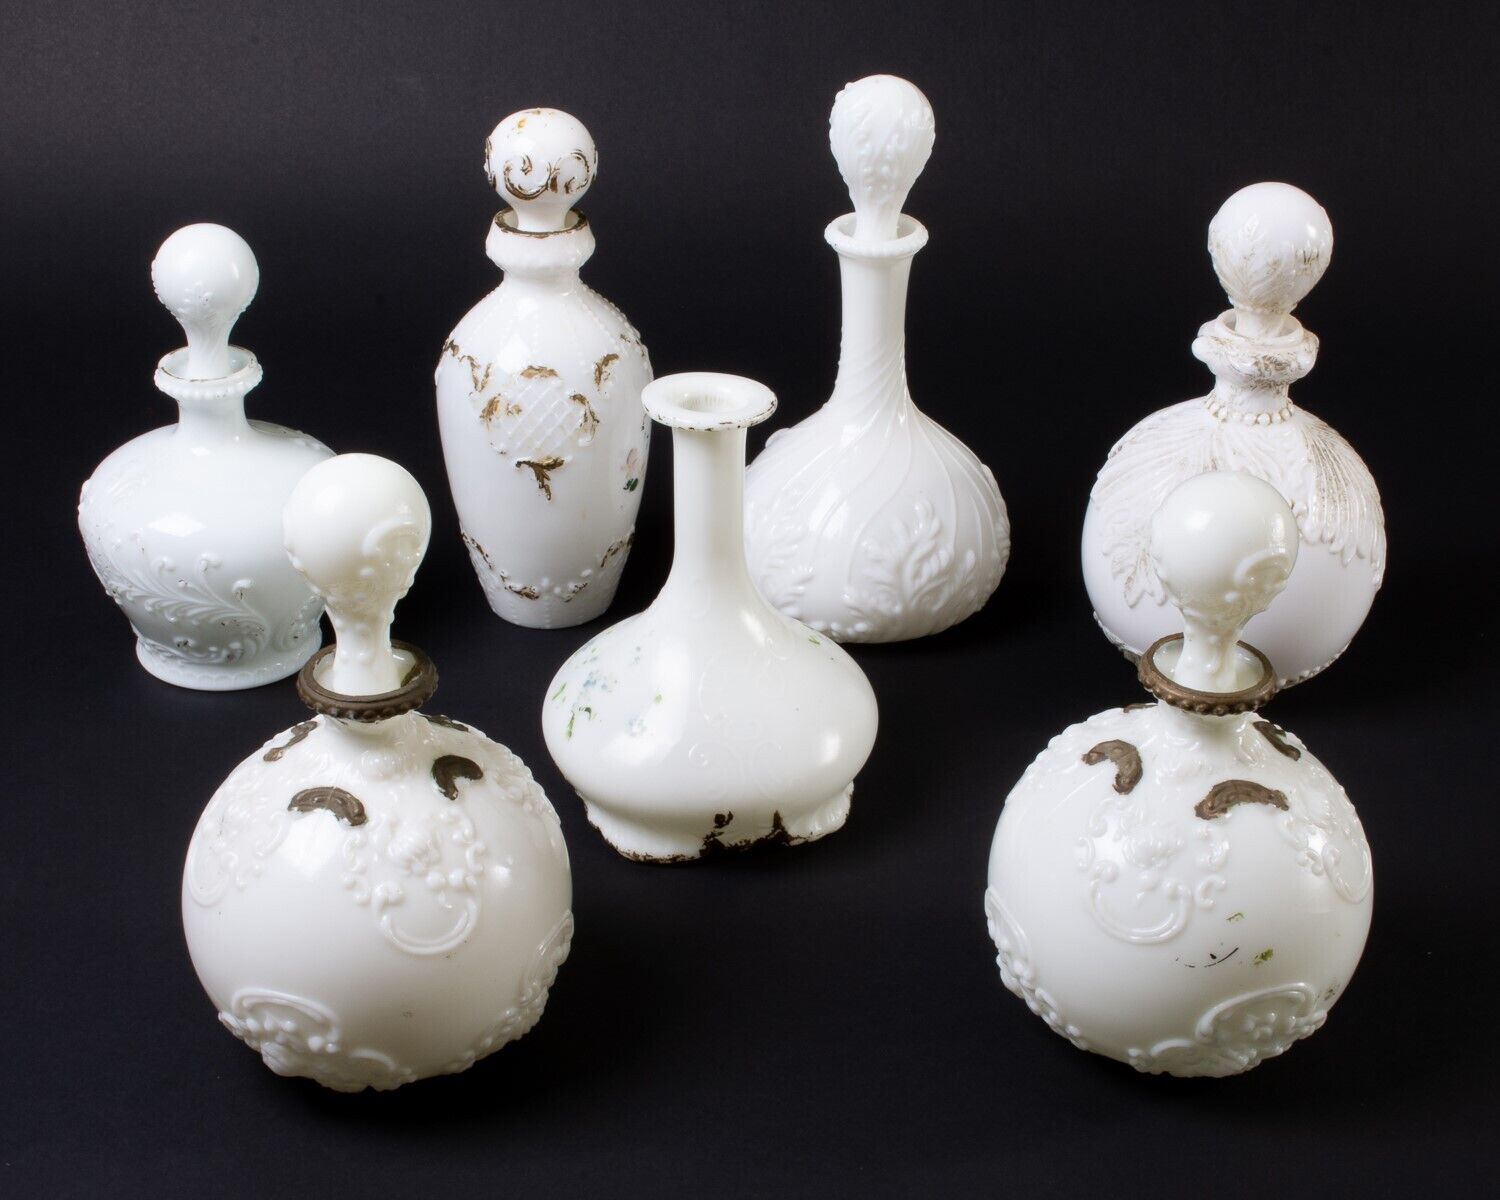 Lot of 7 Vintage Milk Glass Decanter Bottles with Stoppers Gold Painted Embossed